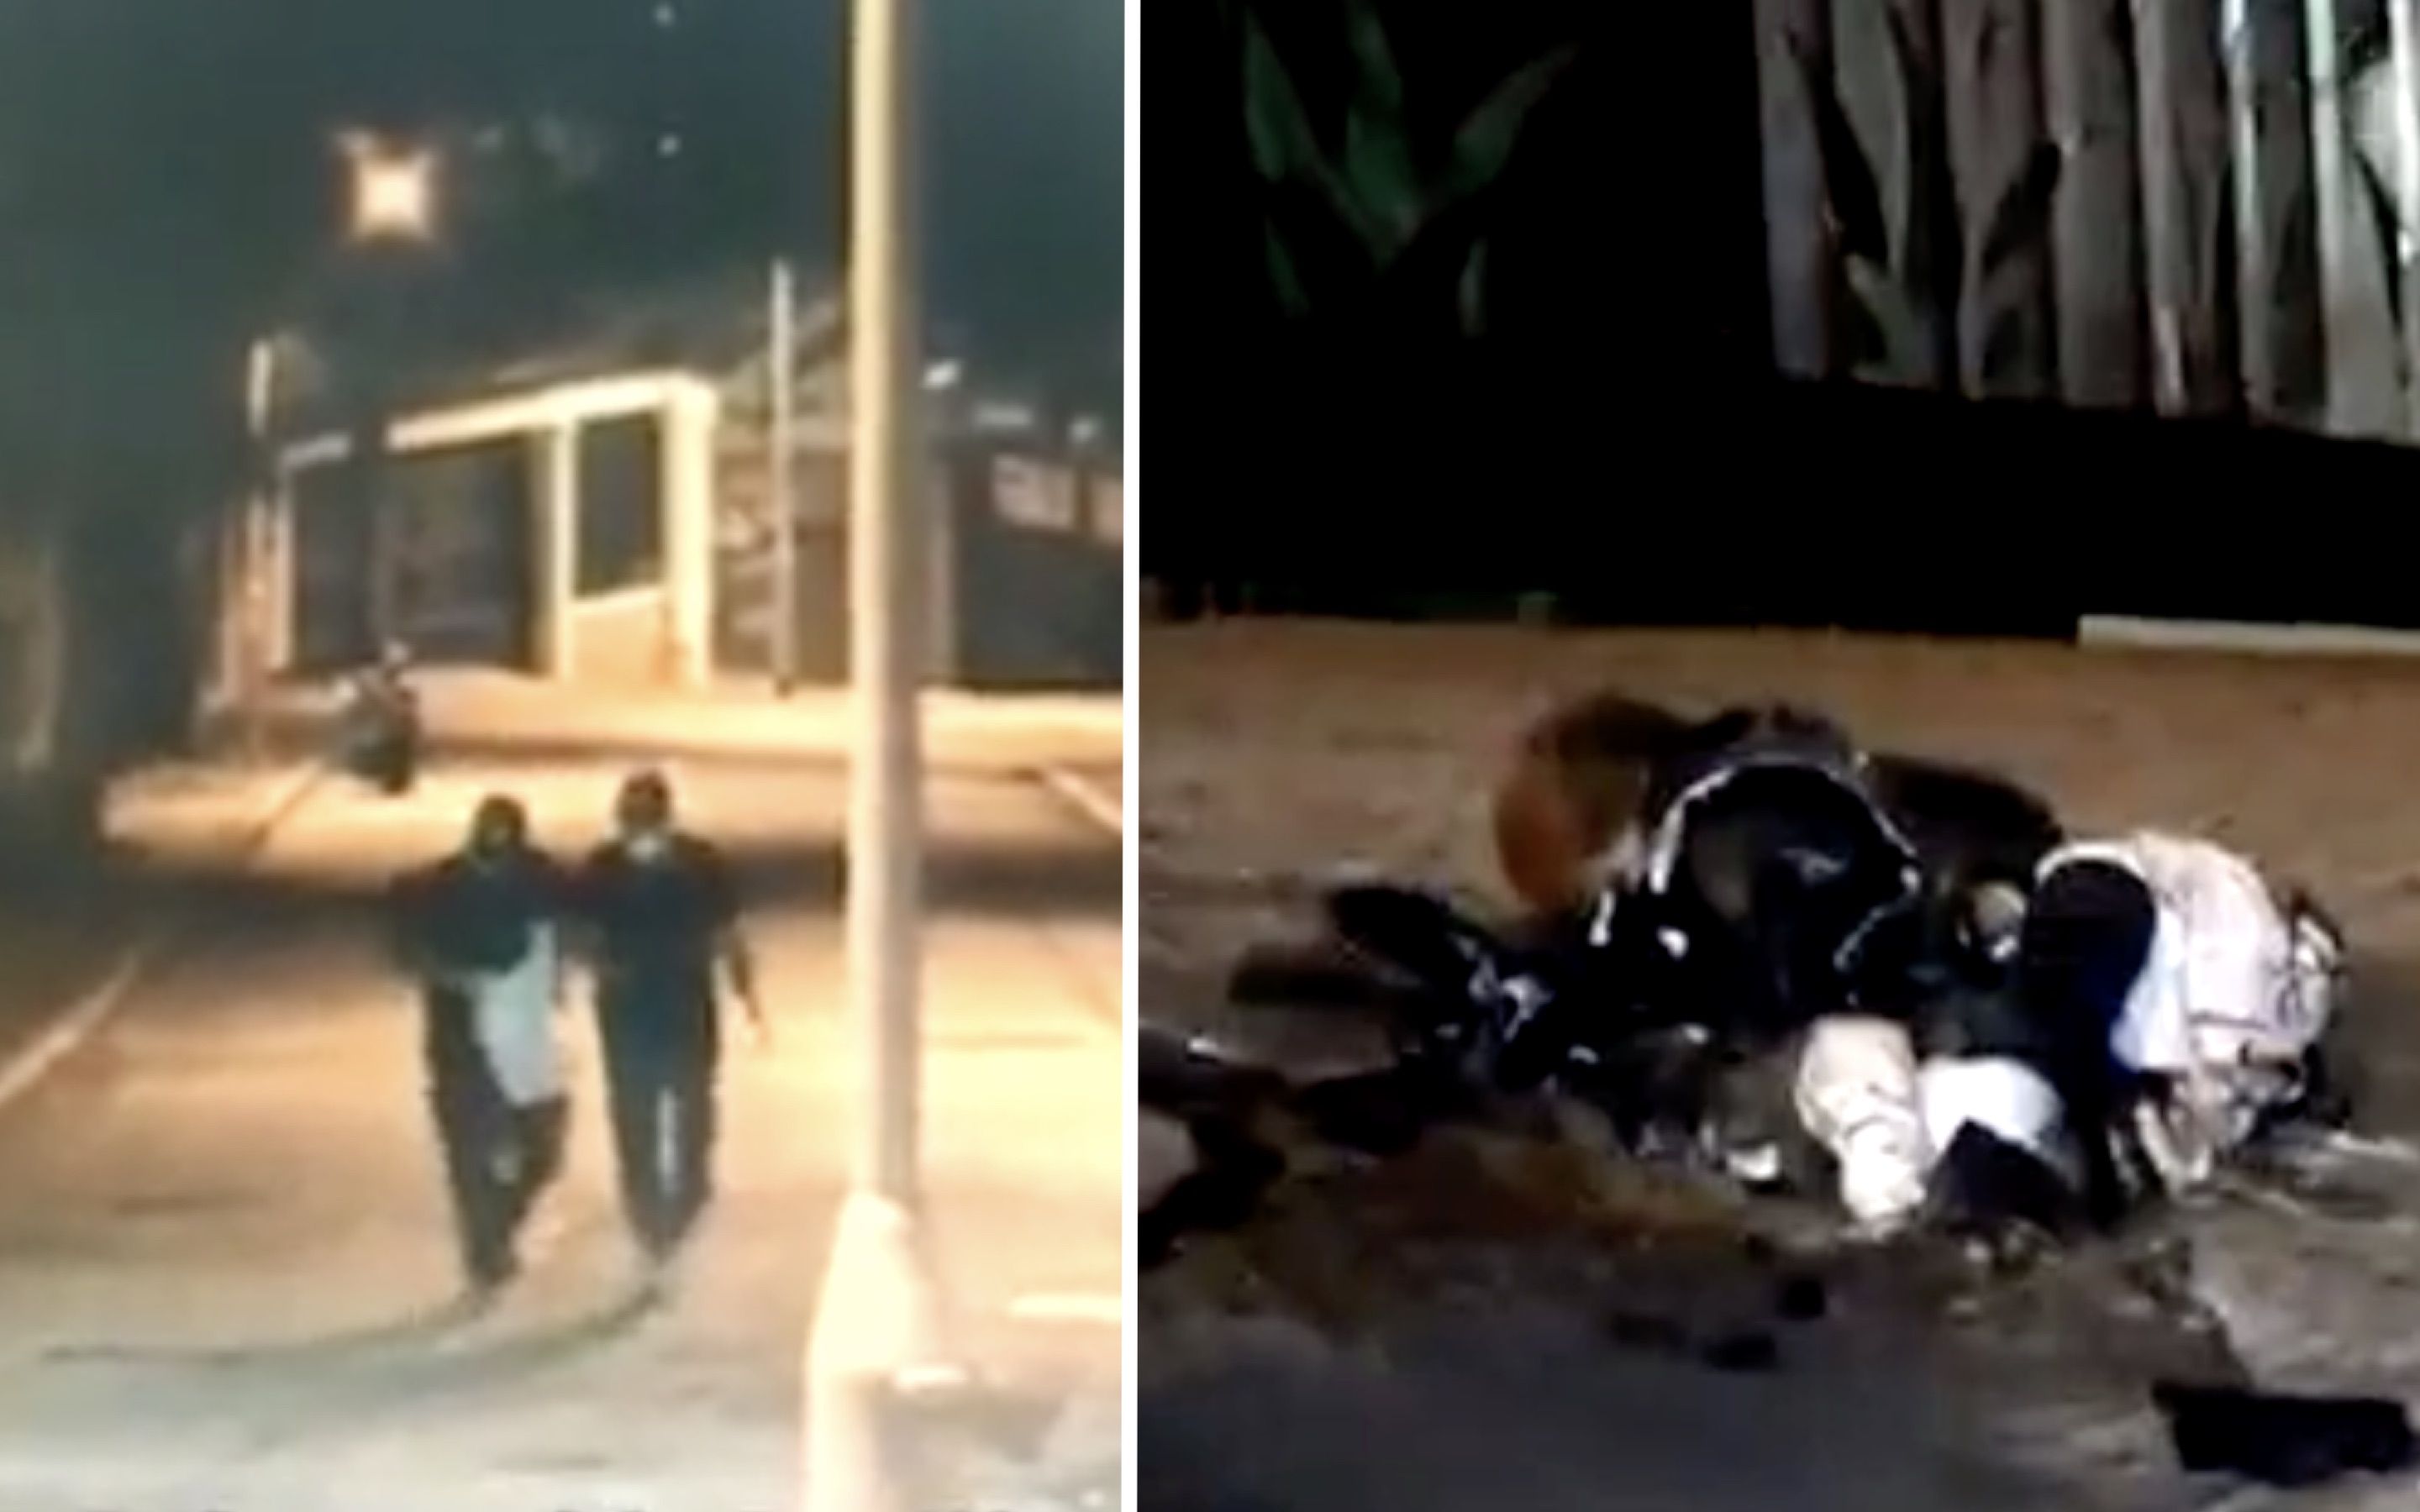 (Left) CCTV footage shows three men carrying a white bag walking towards the home of media tycoon Jimmy Lai before throwing two molotov cocktails (right) at his home. Screengrabs via YouTube.